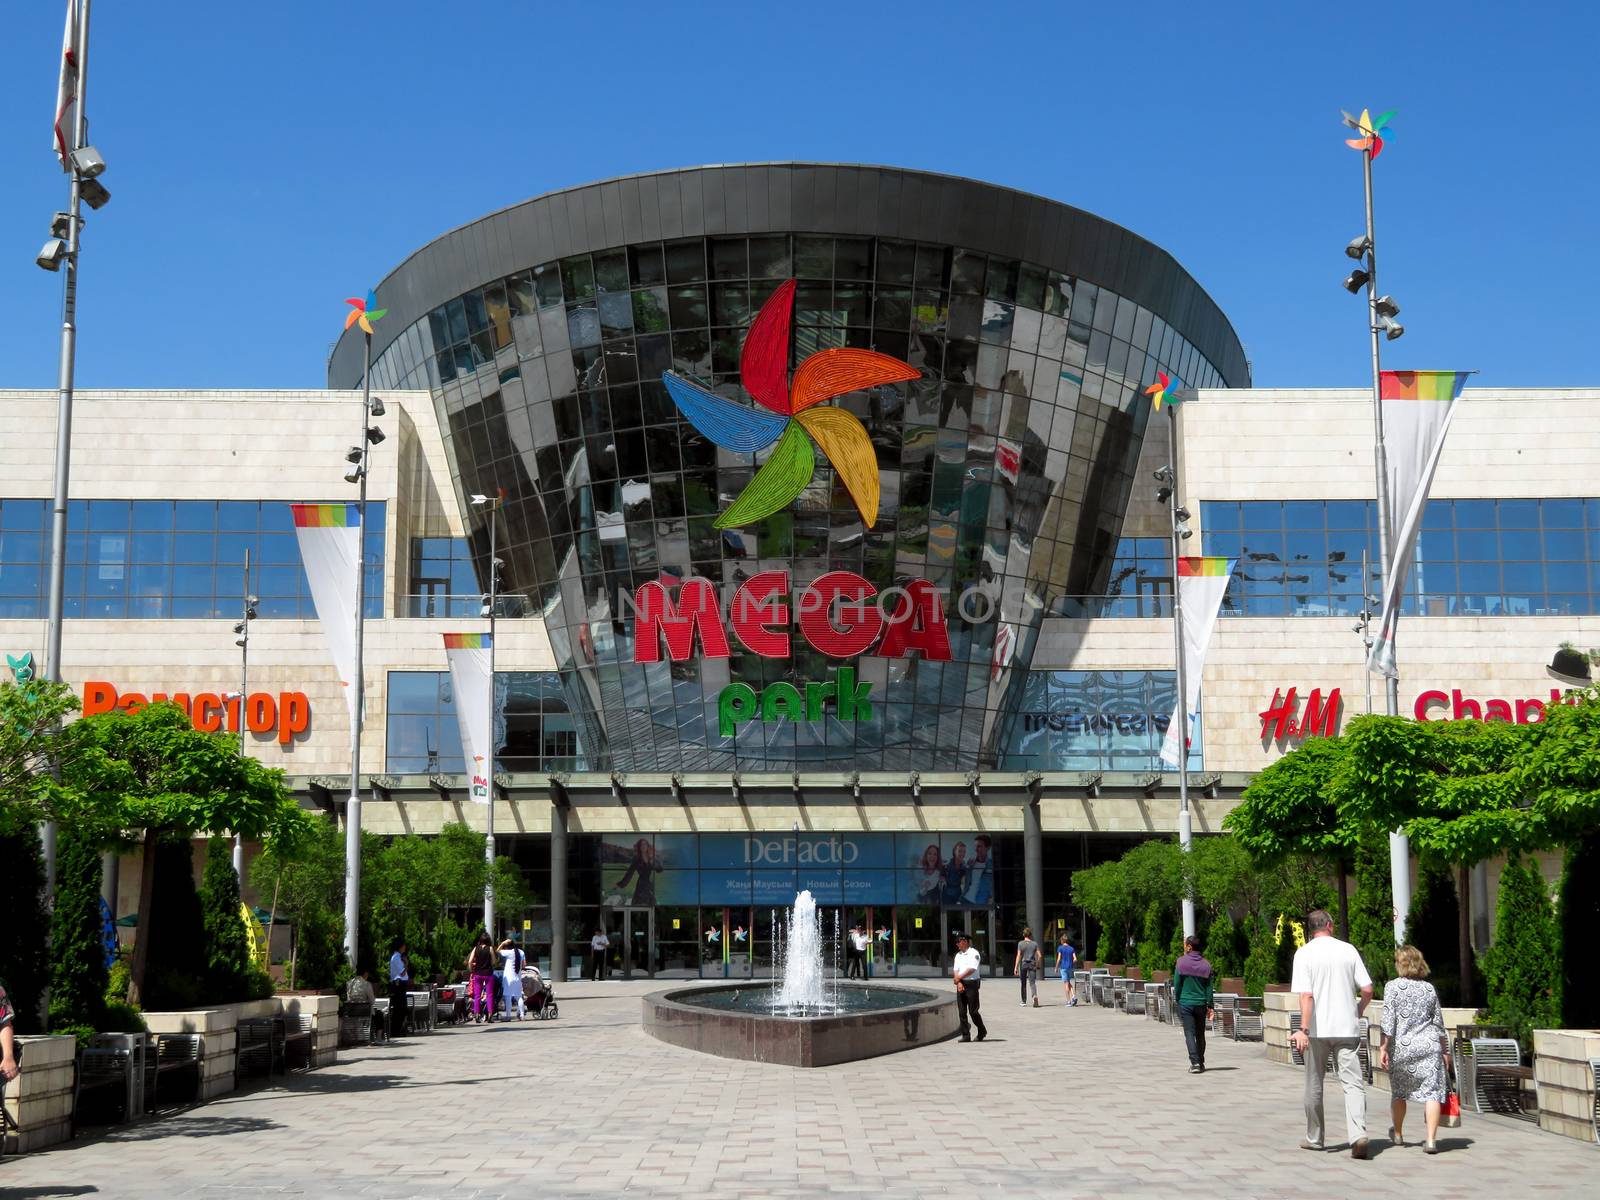 ALMATY, KAZAKHSTAN - June 15, 2019: Shopping and entertainment center Mega Park in Almaty, Kazakhstan. Opened in 2015, it is the largest department store in Almaty. Unidentified people are outside.